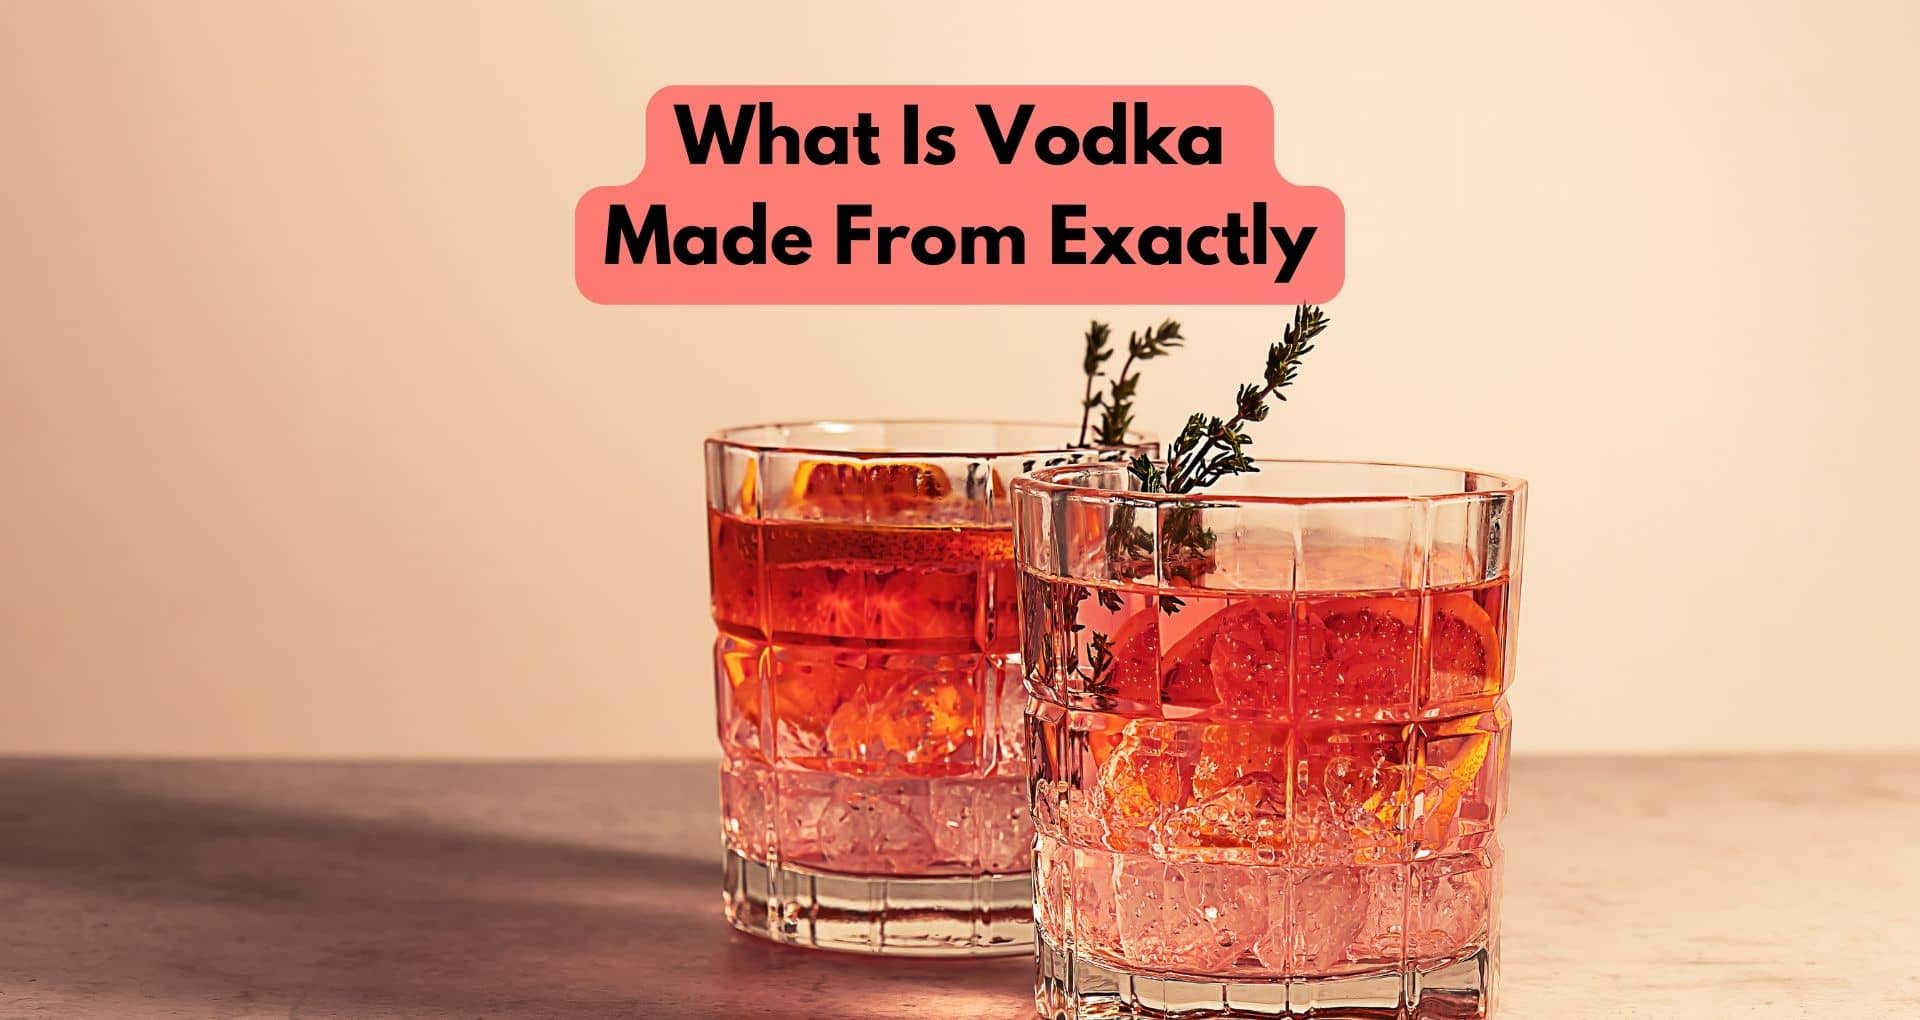 What Is Vodka Made From Exactly?